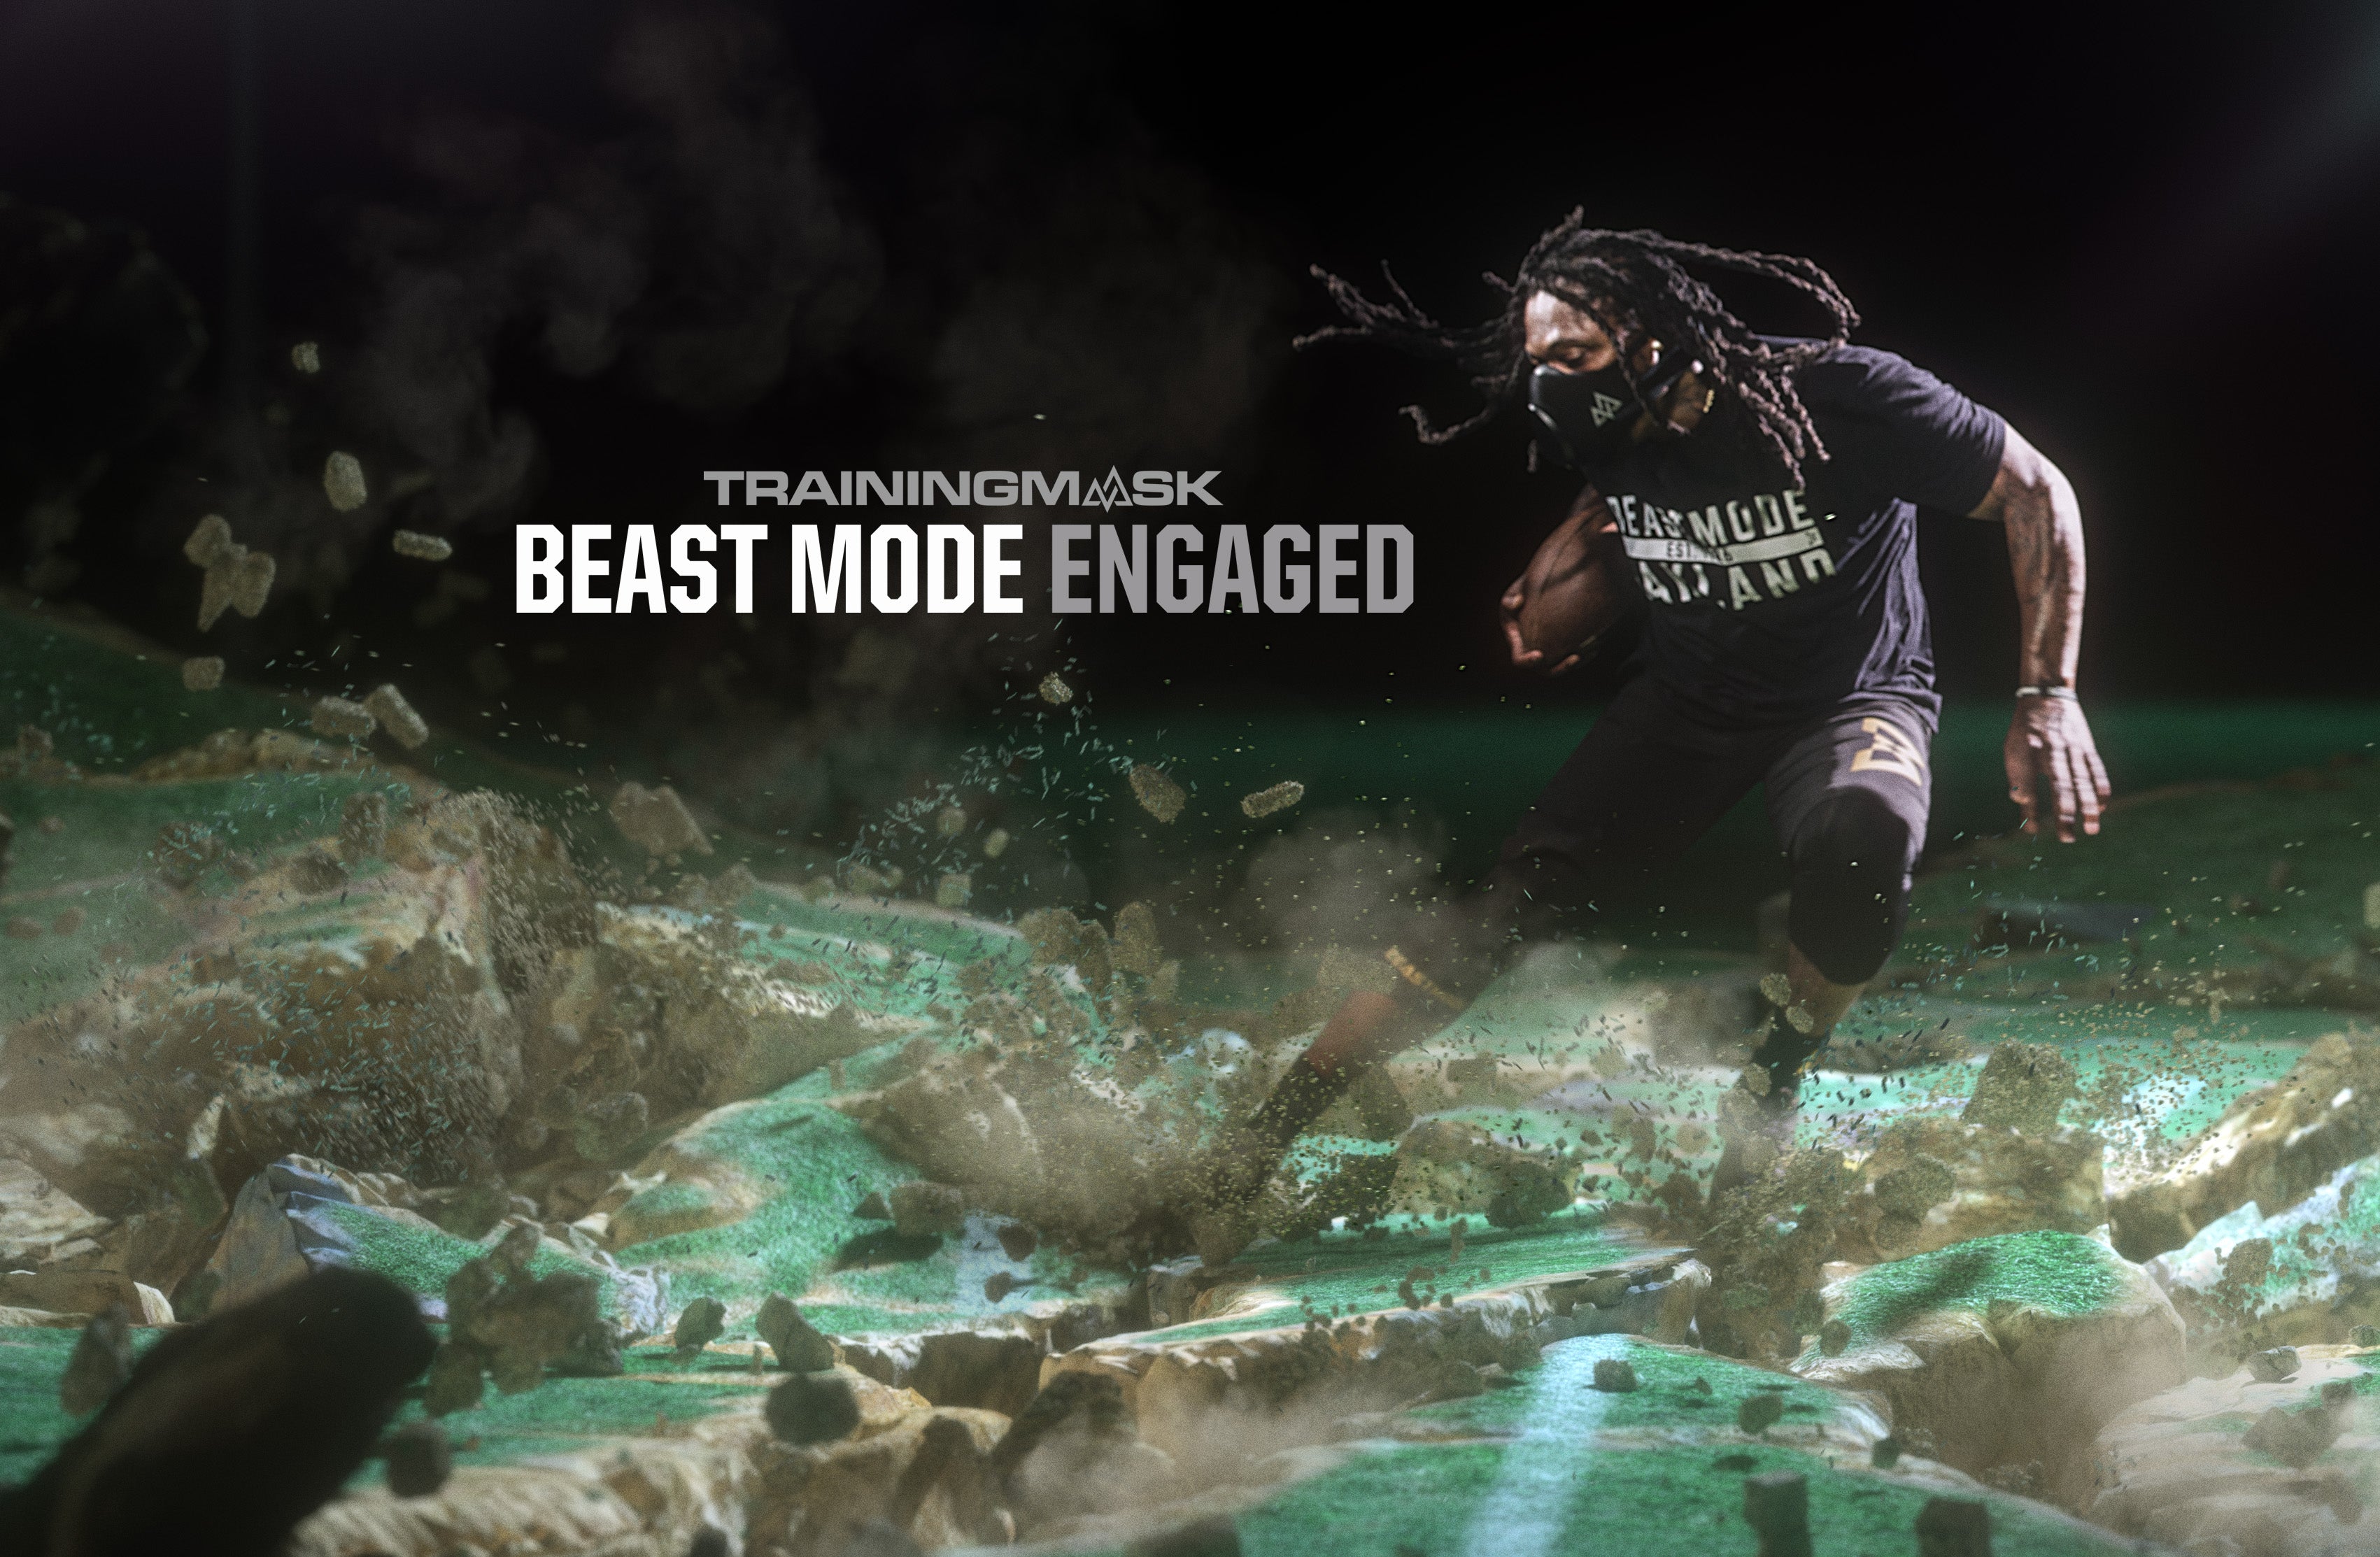 Load video: Marshawn Lynch highlight video that shows training mask 3.0 and is titled BEAST MODE Enguaged